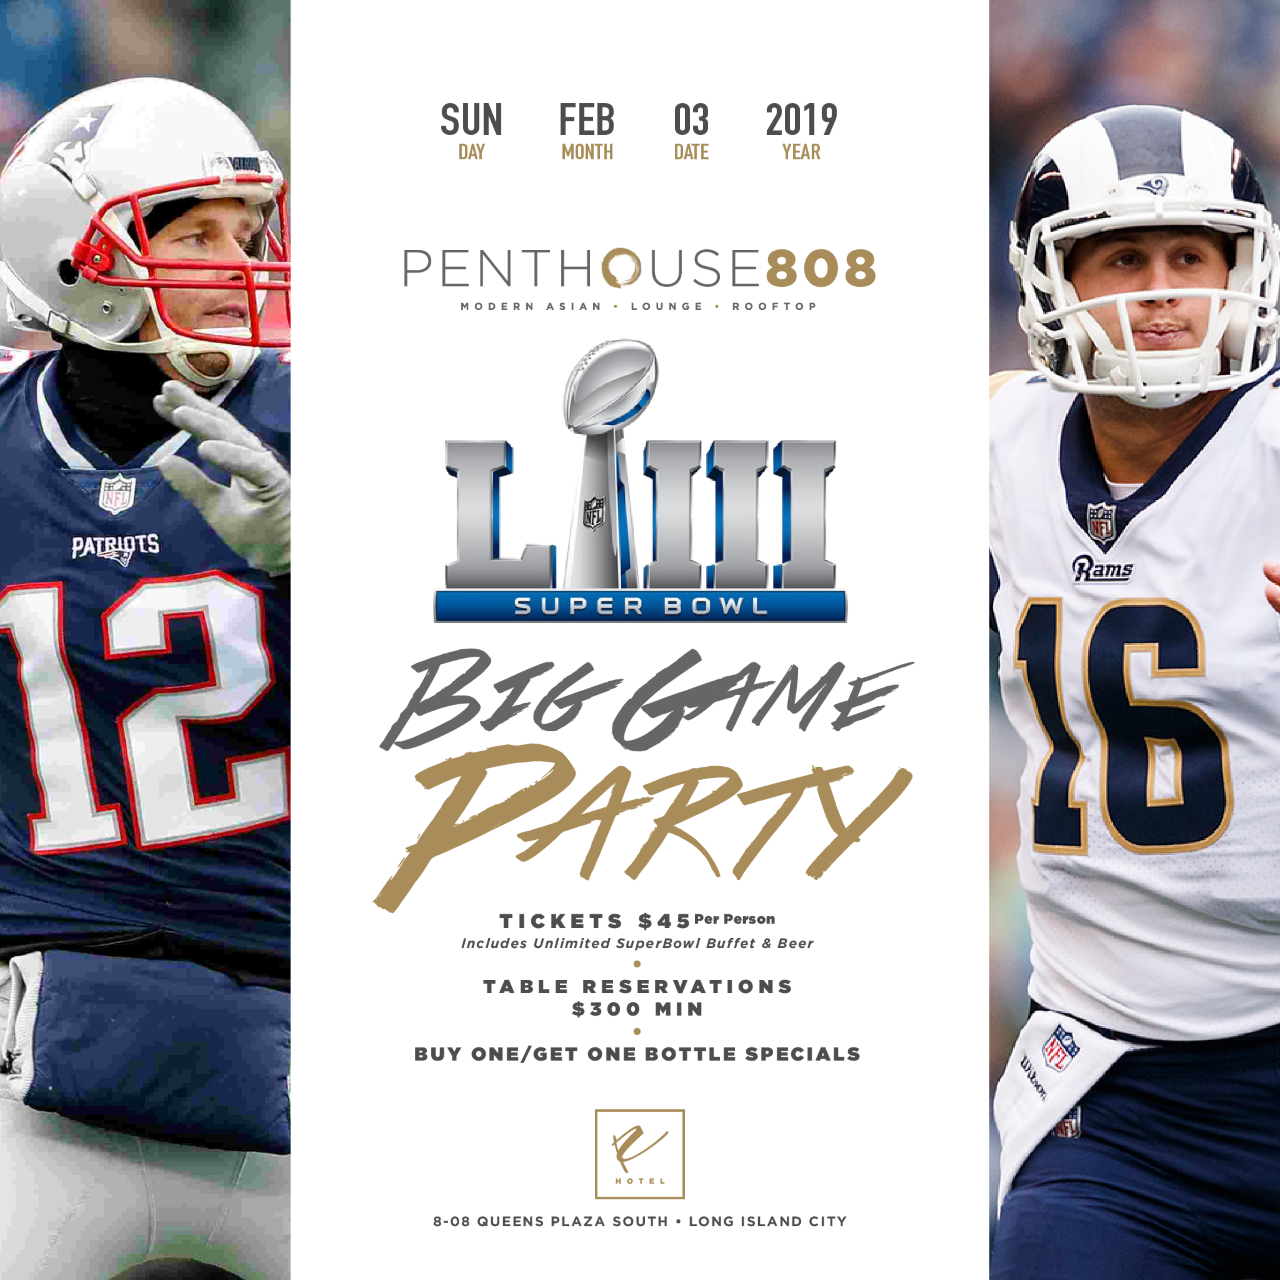 Super Bowl Sunday Openbeer & Food Buffet party at Ravel Penthouse 808 2019